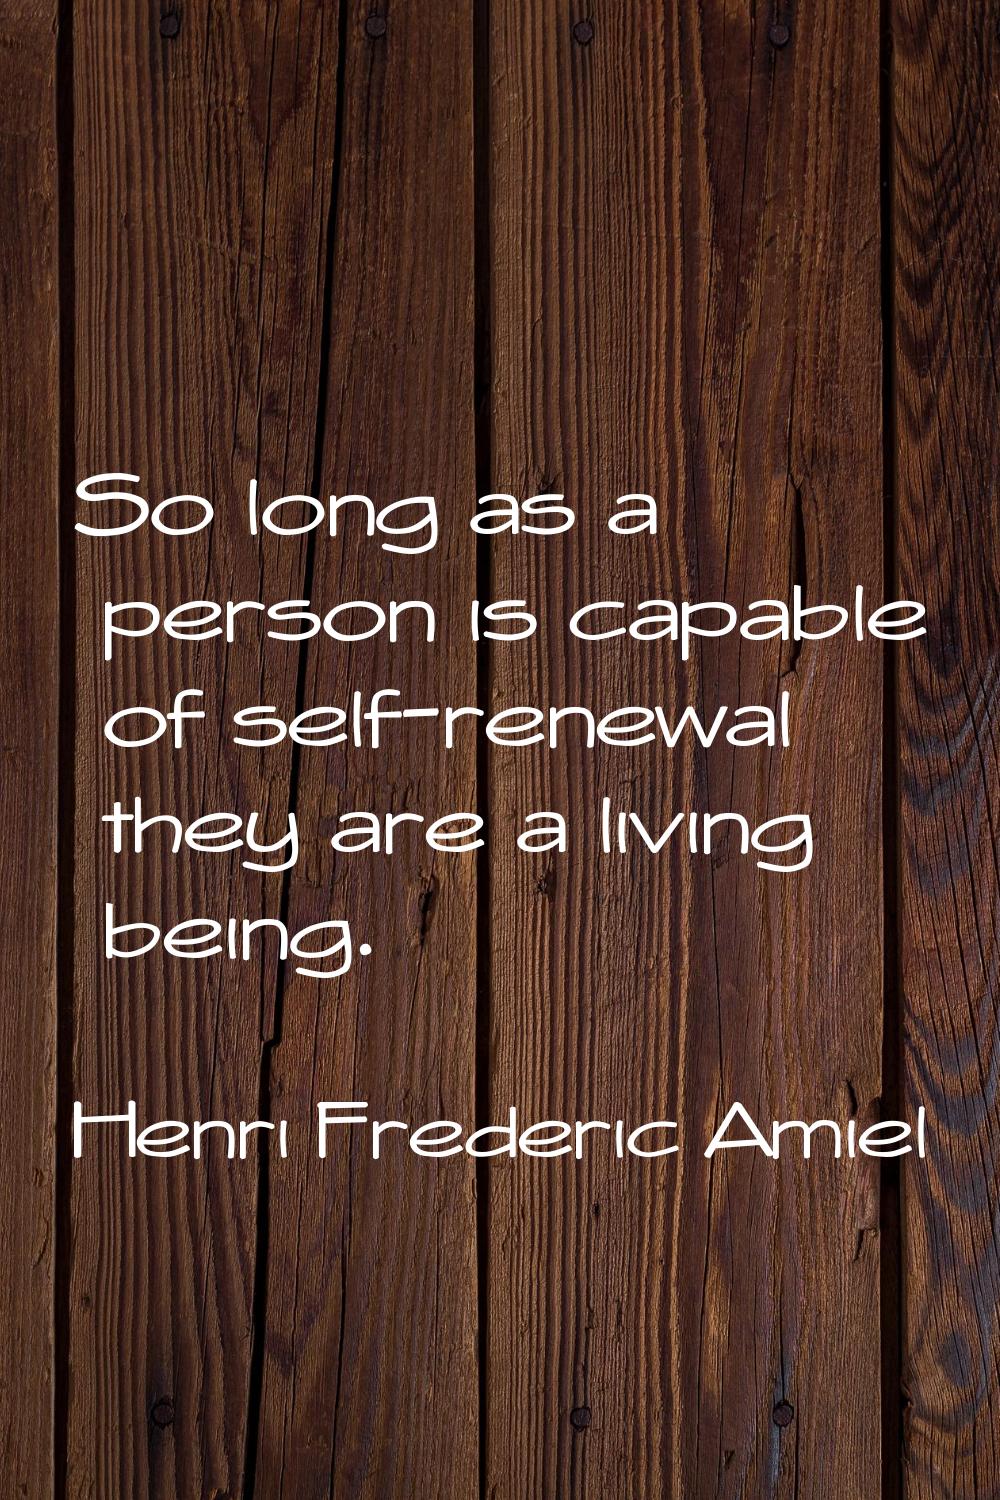 So long as a person is capable of self-renewal they are a living being.